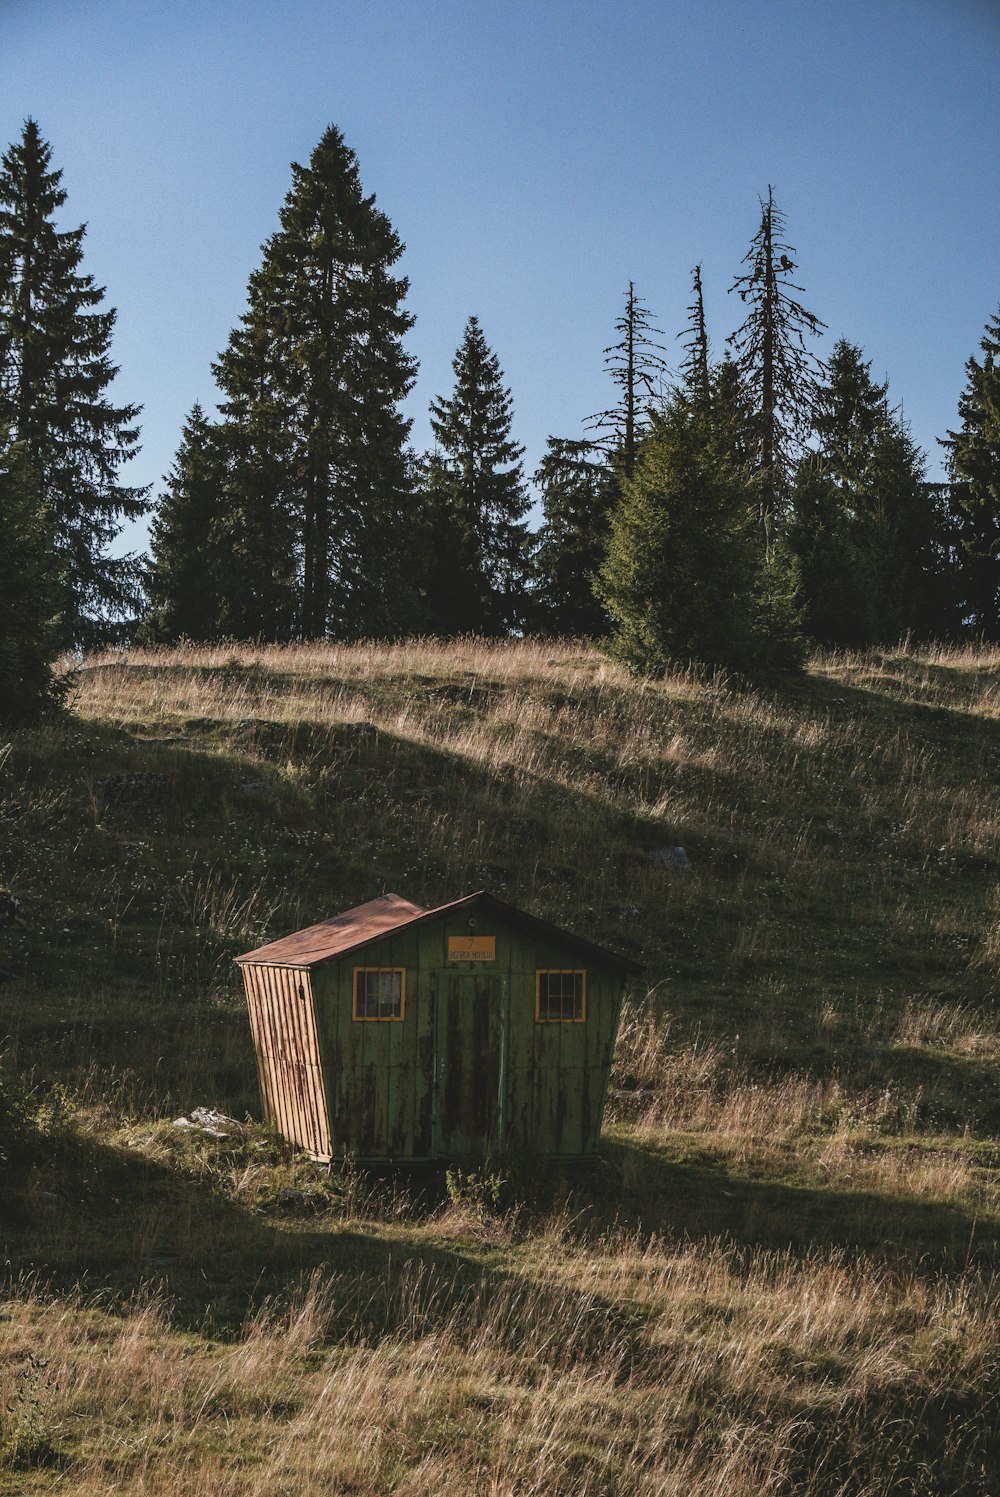 a small outhouse in the middle of a grassy field